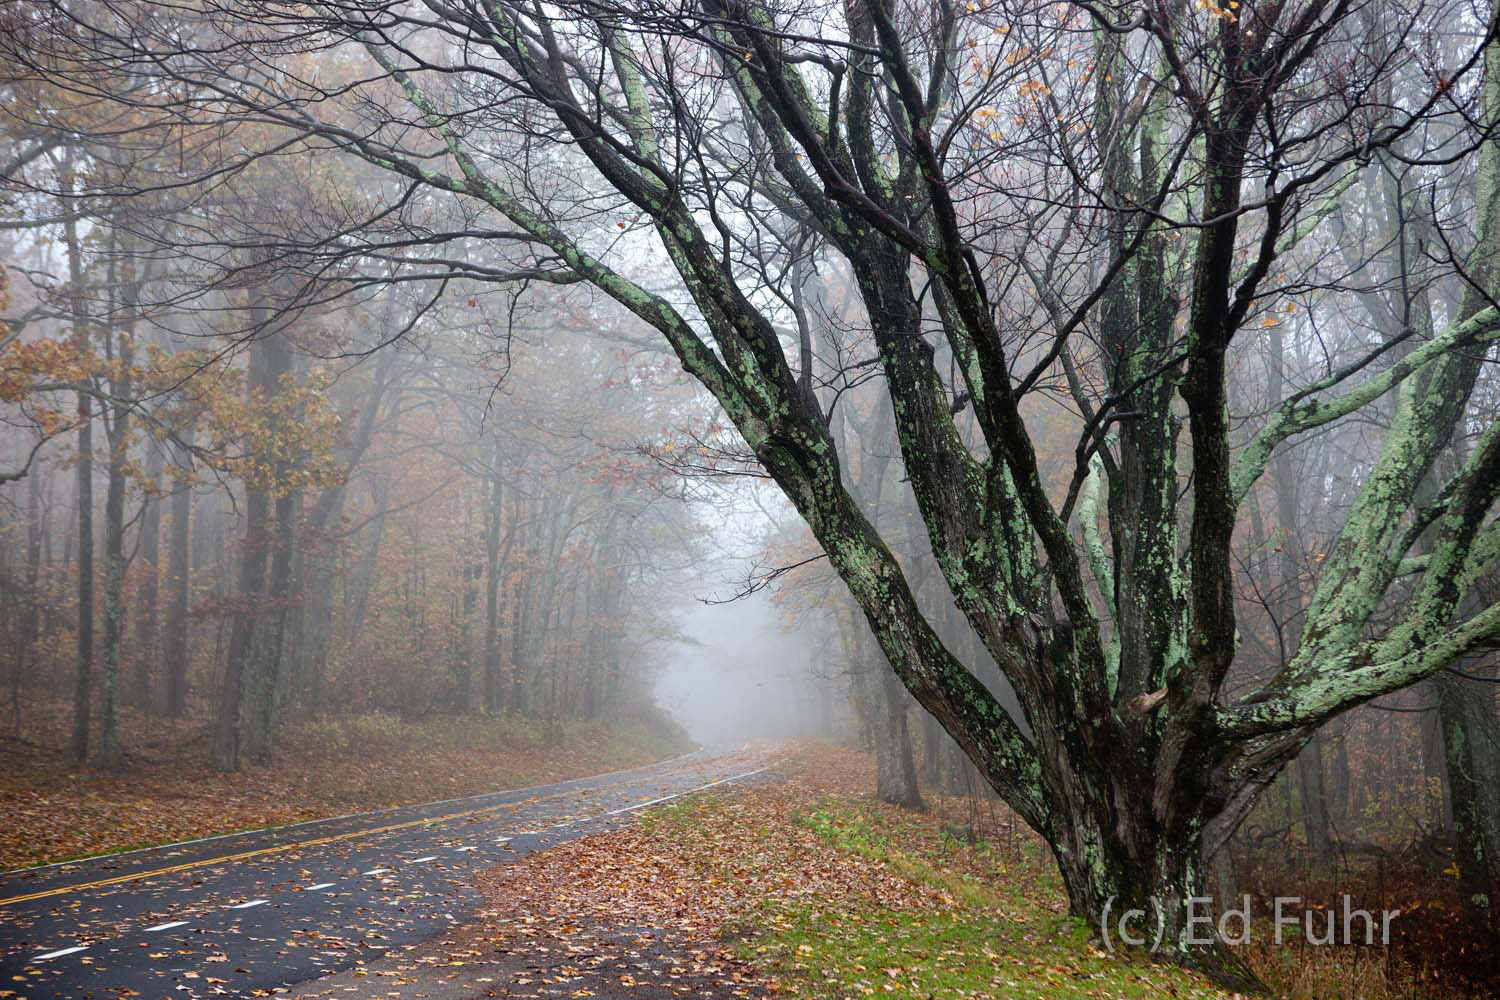 One of a series of this great maple at South River Overlook, this image captures the moment where fall's fog hovers over the...